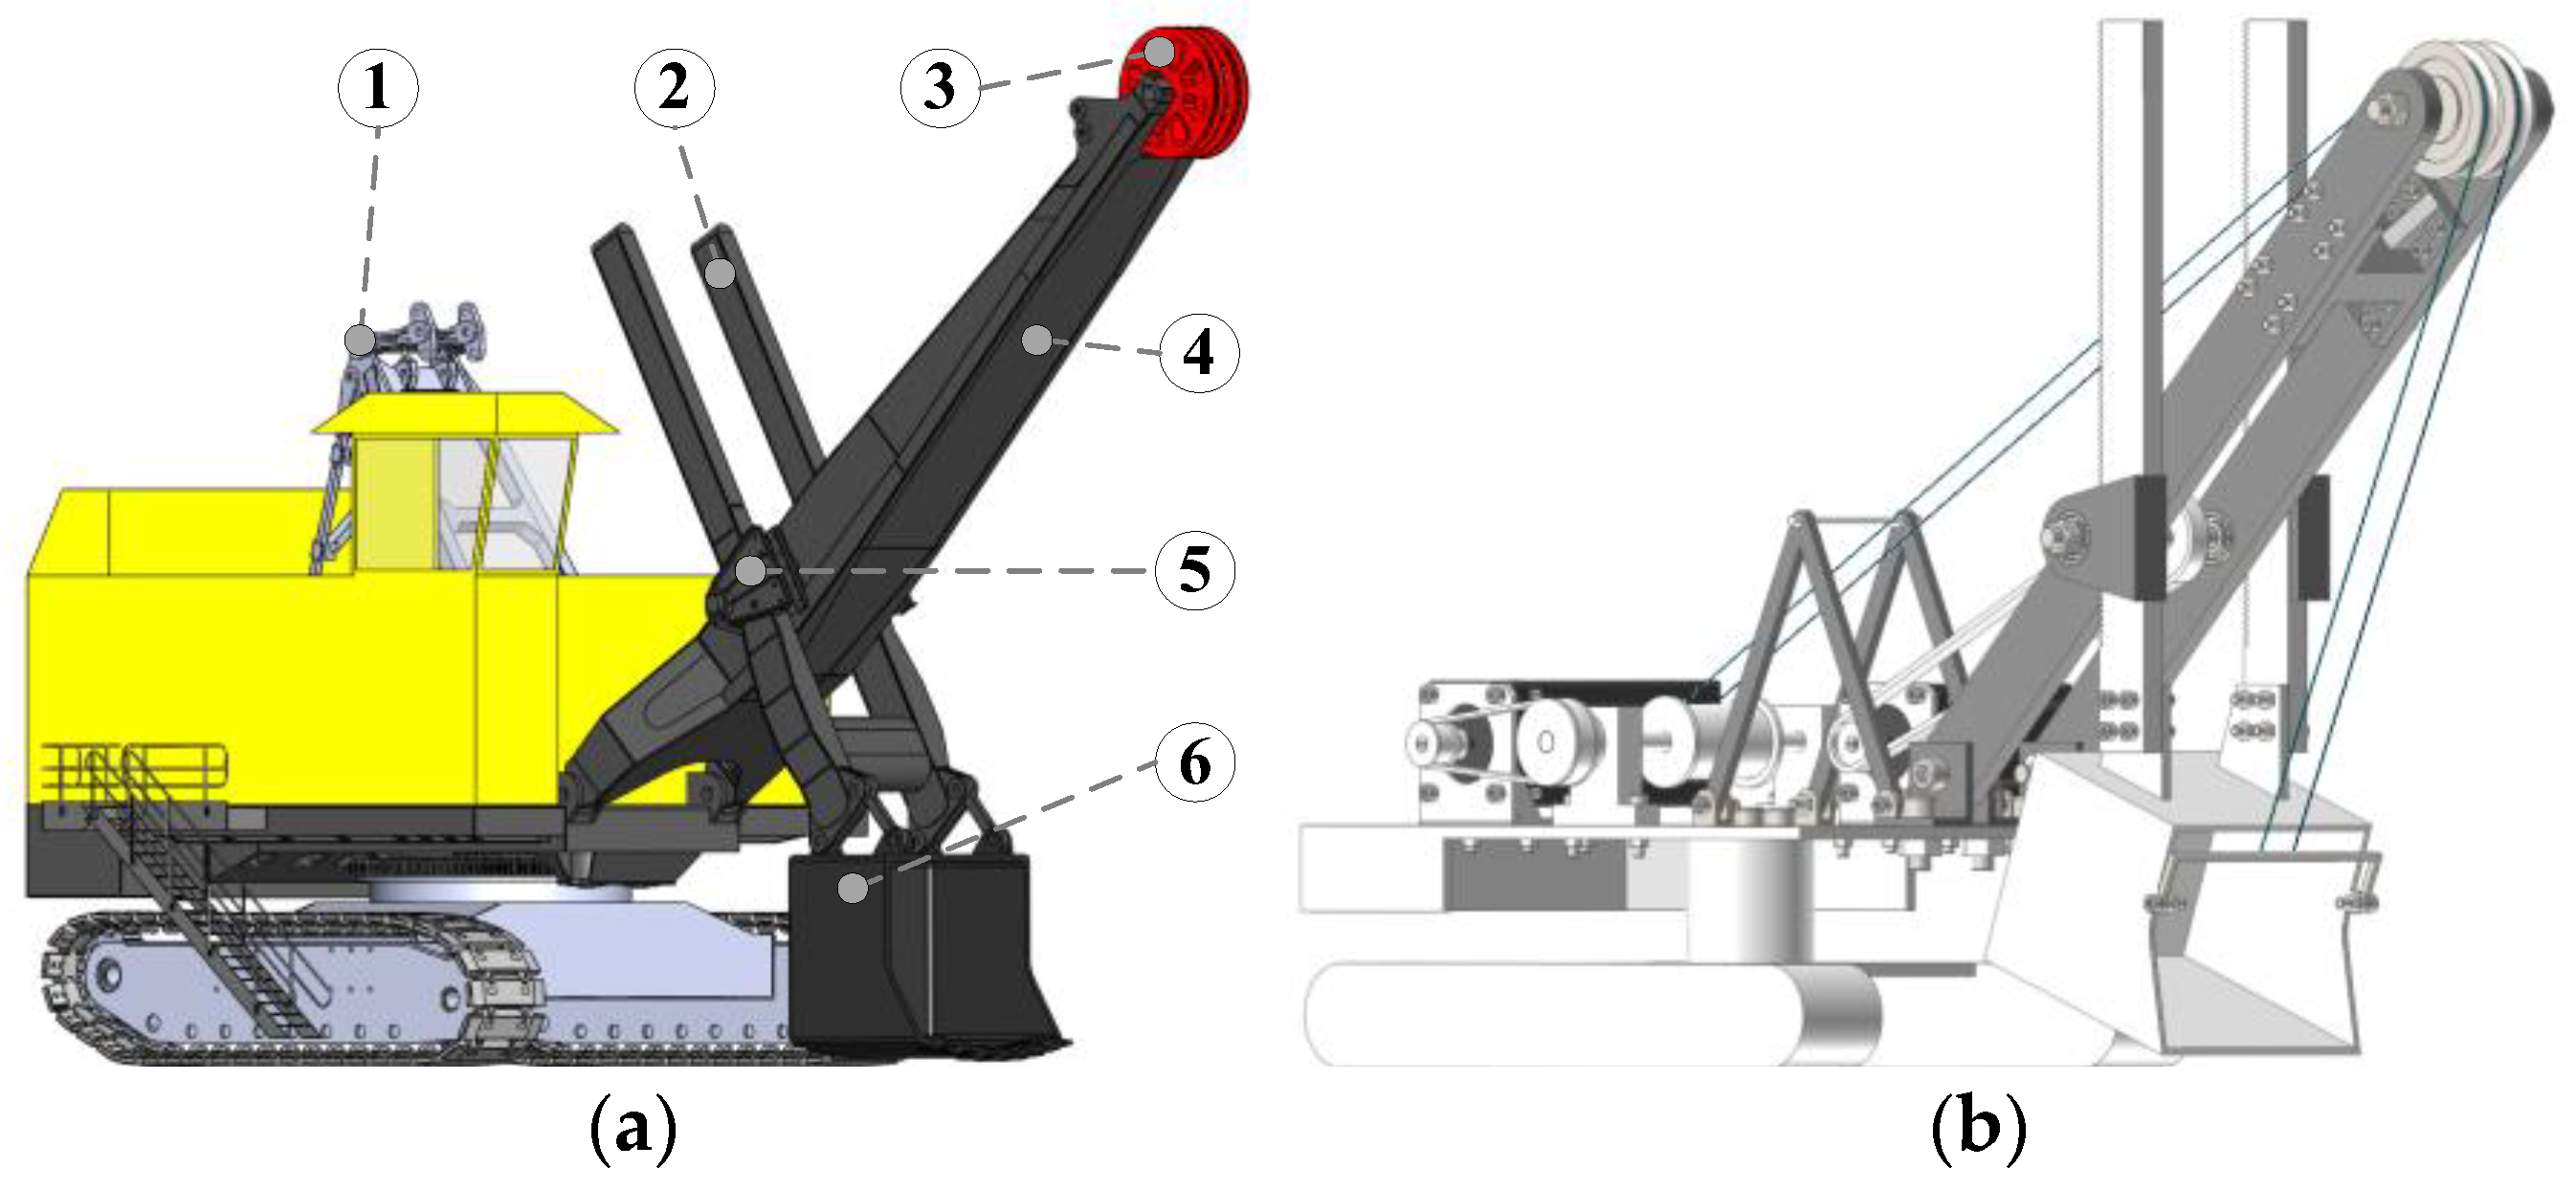 Rope making machine, 3D CAD Model Library